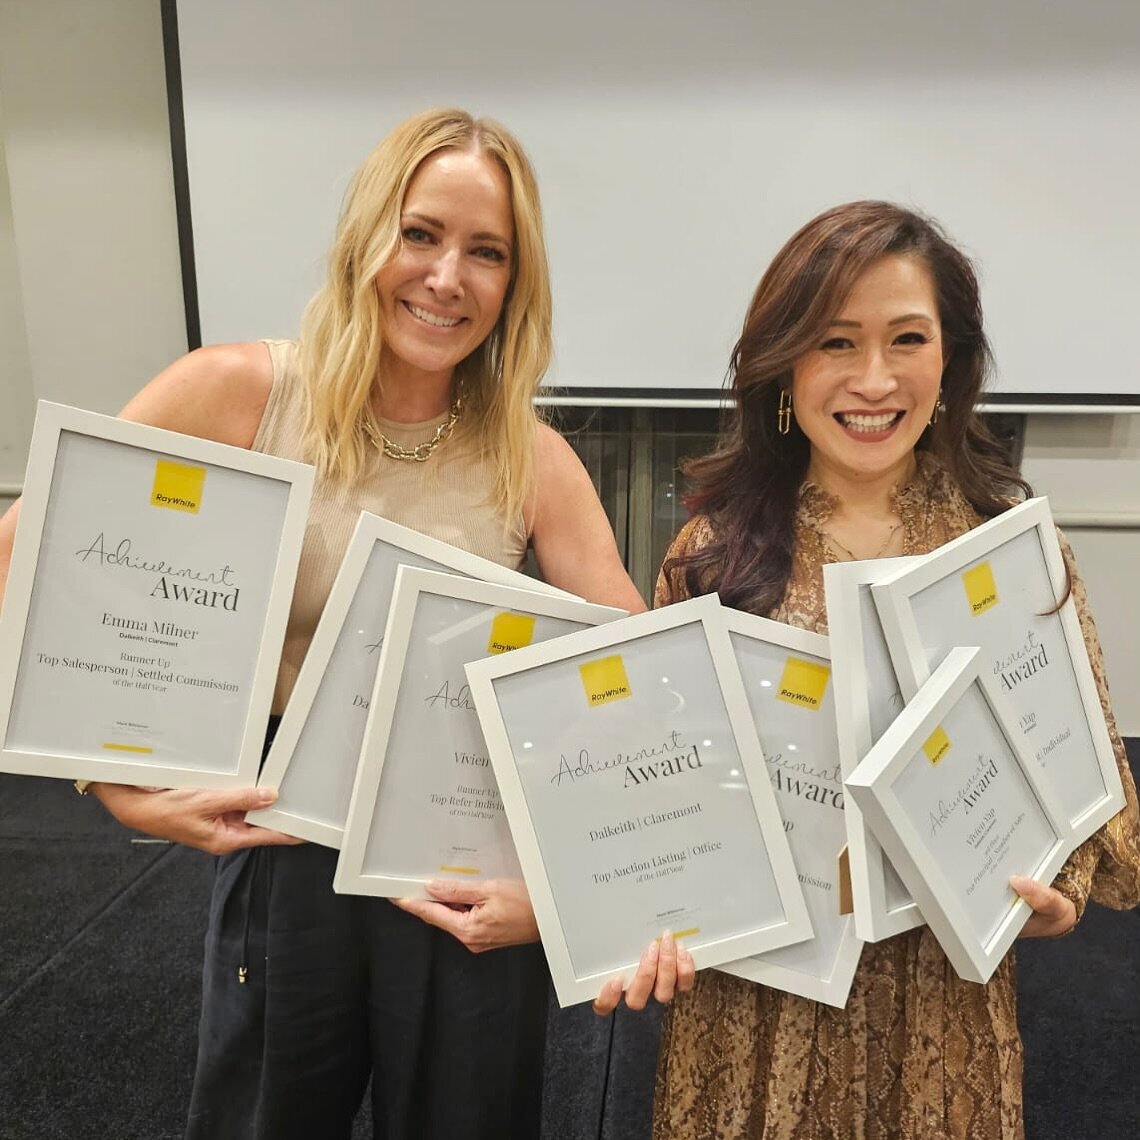 Ray White Half Yearly Awards Night 🌟 It&rsquo;s so nice to have the hard work recognised, and totally surprised to receive Runner Up Top Salesperson in WA. 

Awards aside, everyday I strive to get the very best results for my clients and the pressur